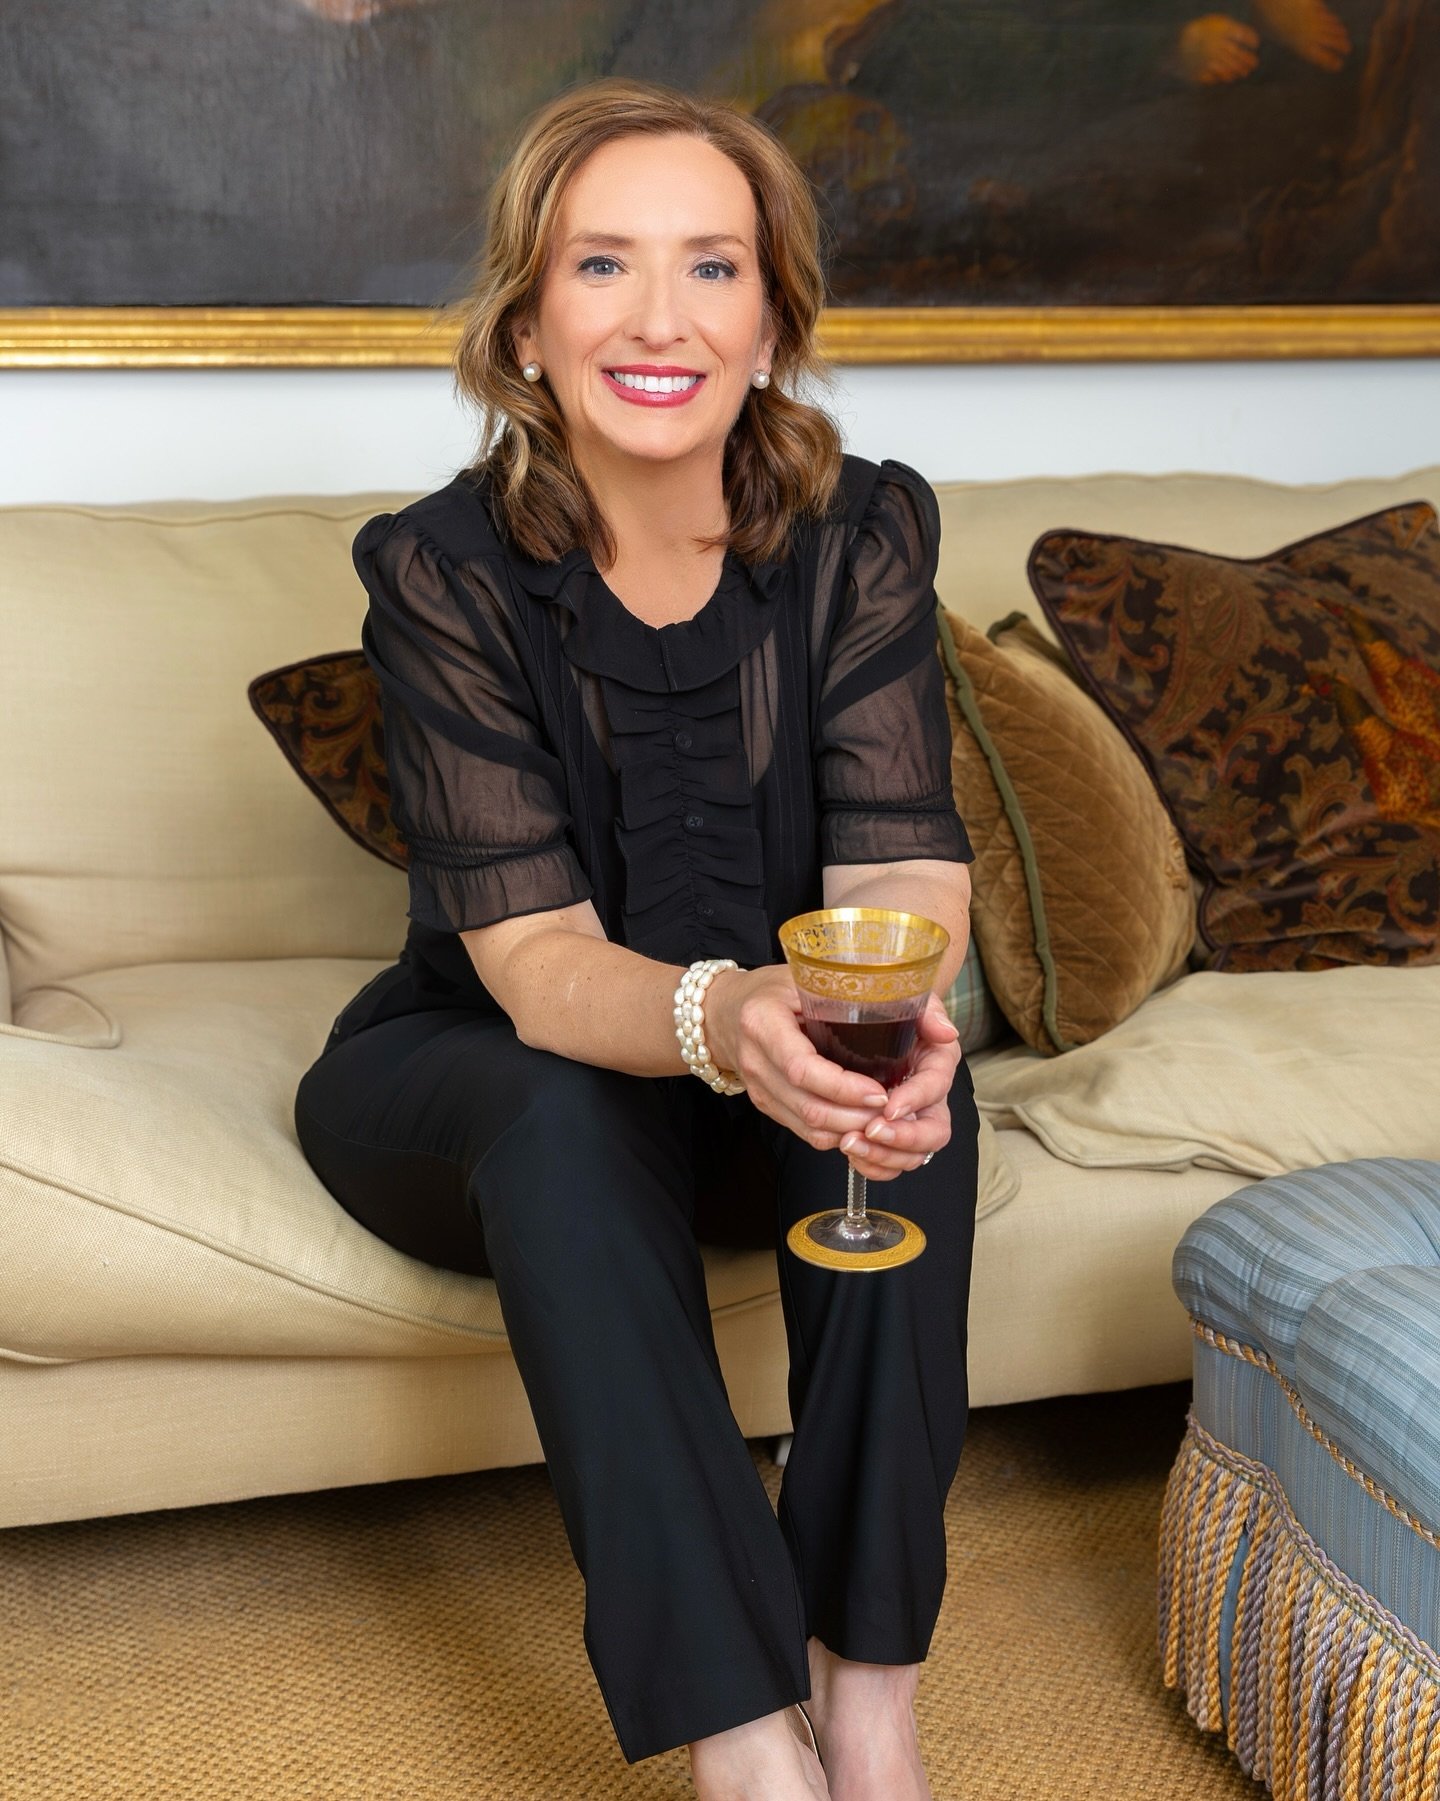 Whip-smart, kind, and curious, Christy Rowland reached an enviable level of success as an industry-shaping business consultant working with top international firms. Her journey conjures up images of jet setting and elbow rubbing with some of the most